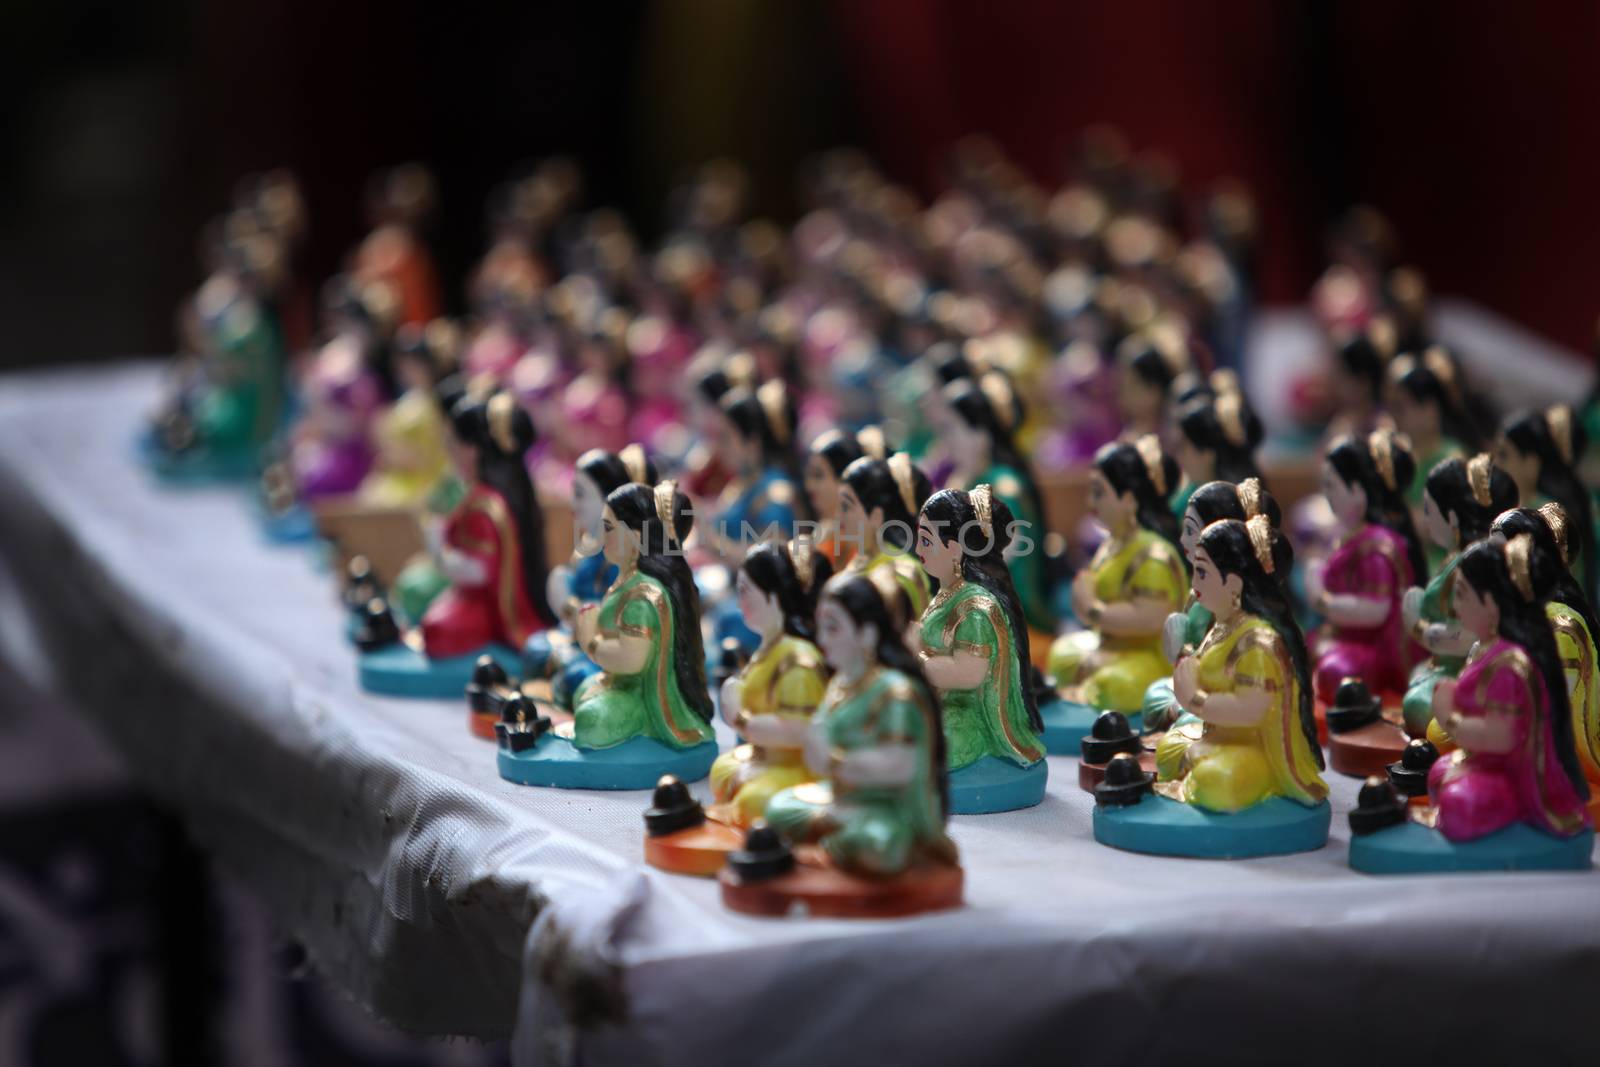 Indian Goddess idols for sale during a hindu festival in India.